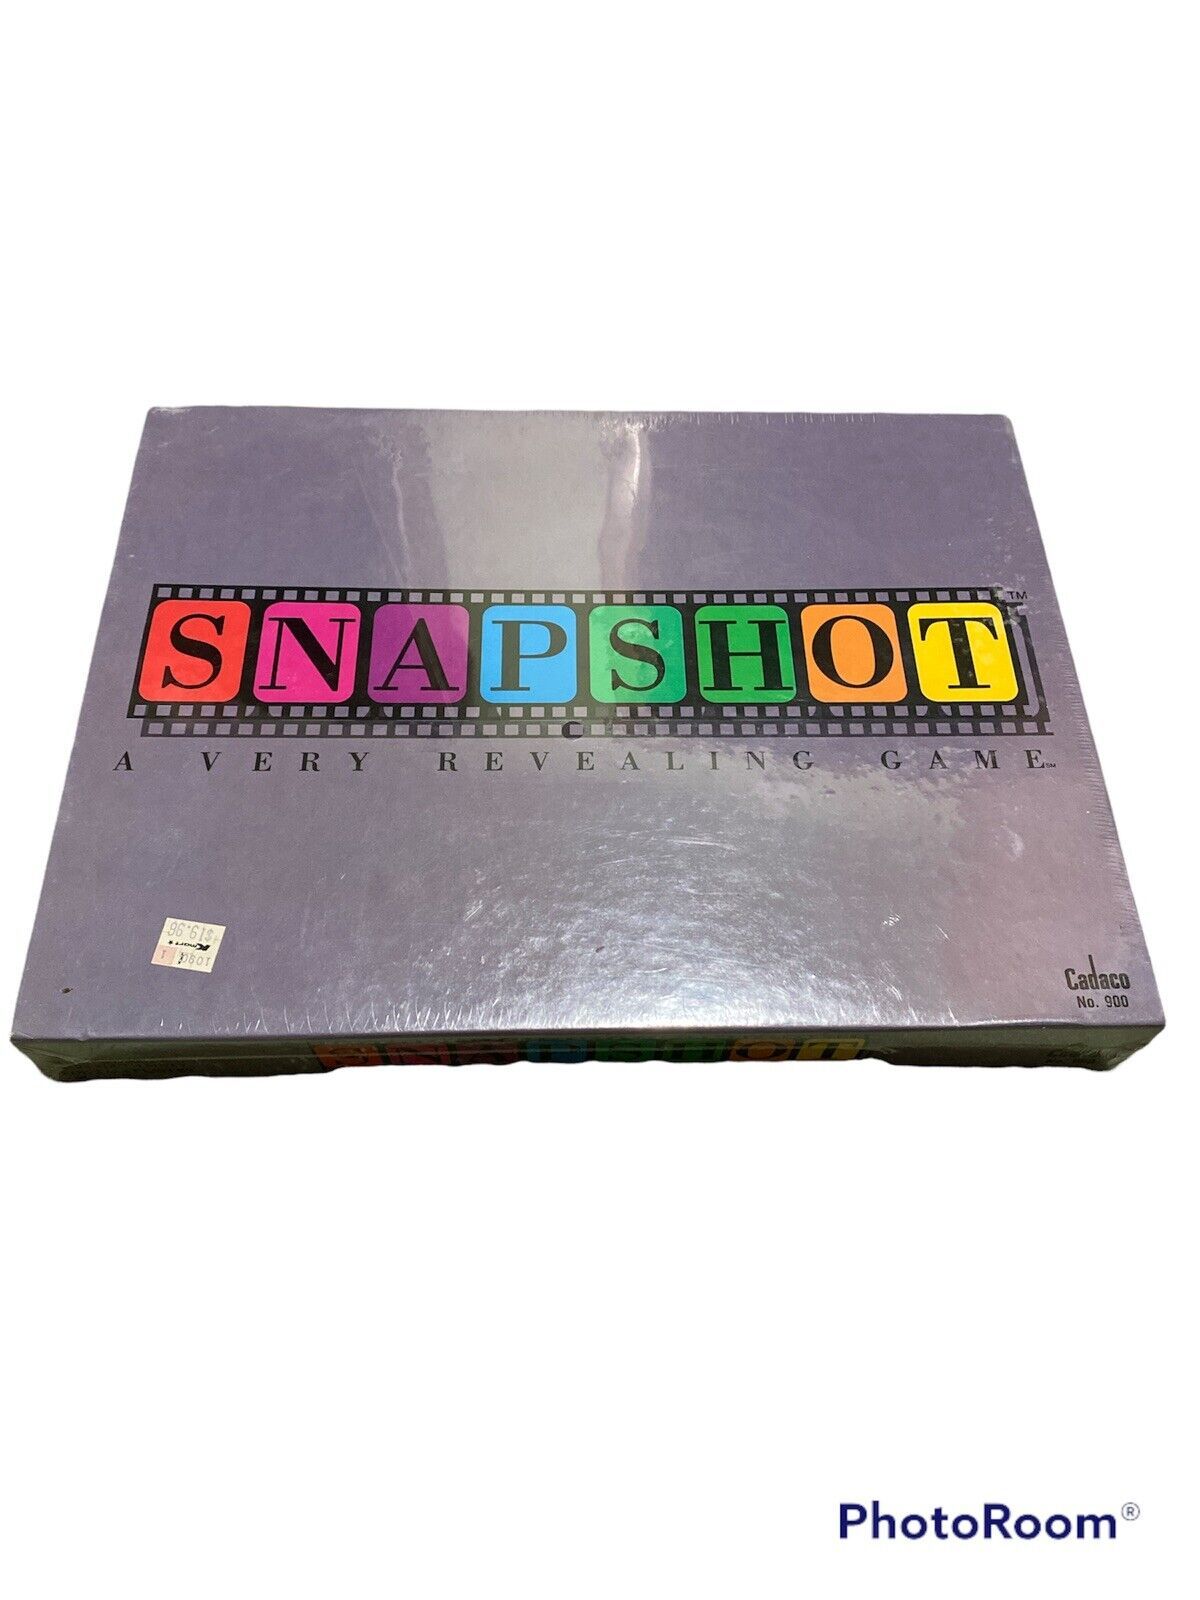 Snapshot “A Very Revealing Game” Vintage 1989 Board Game Cadaco *New Sealed - $19.99